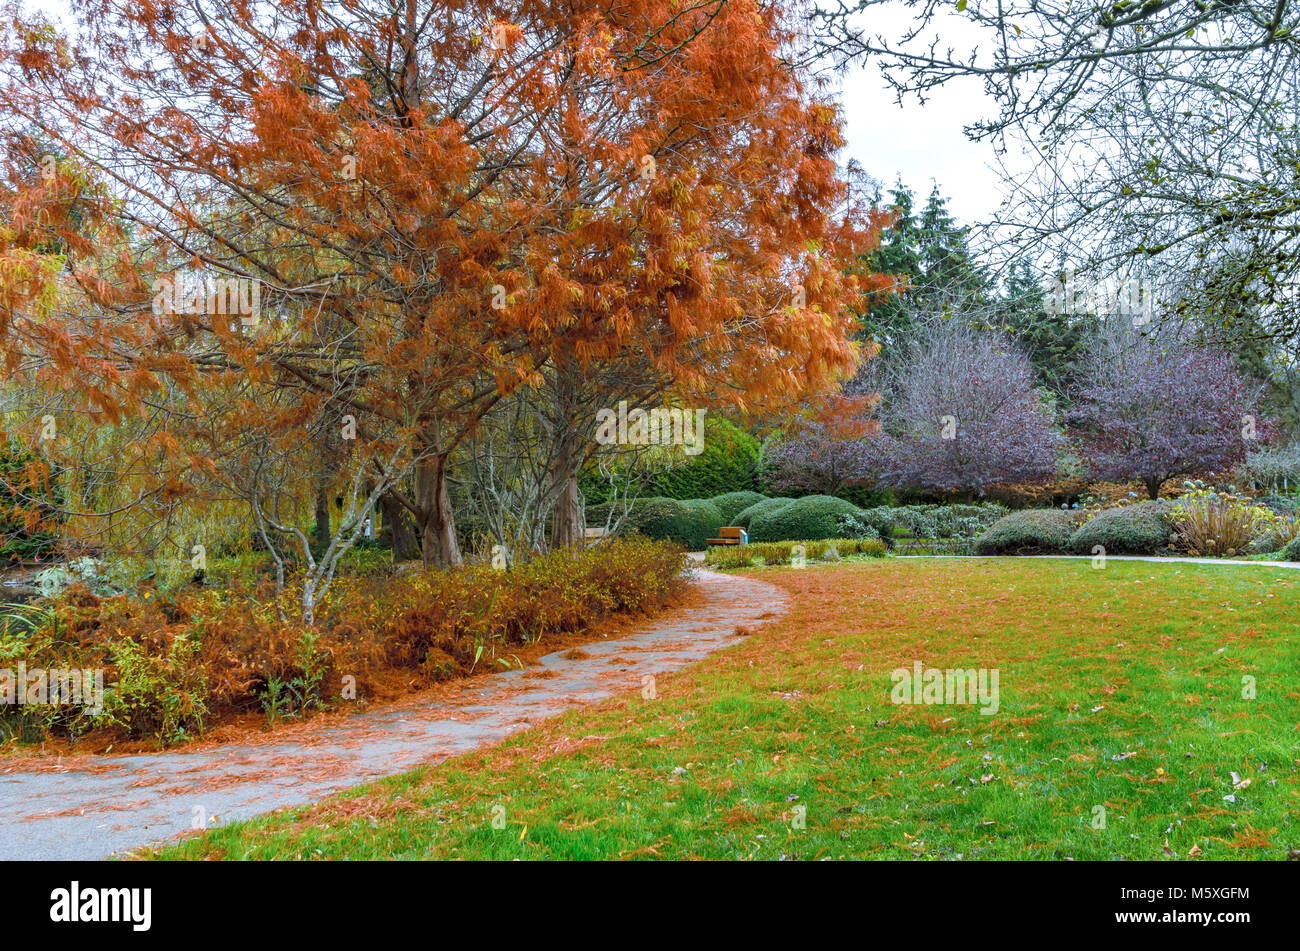 city park on a fall day with red-brown leaves on trees and green grass, bushes, a bench and a footpath Stock Photo